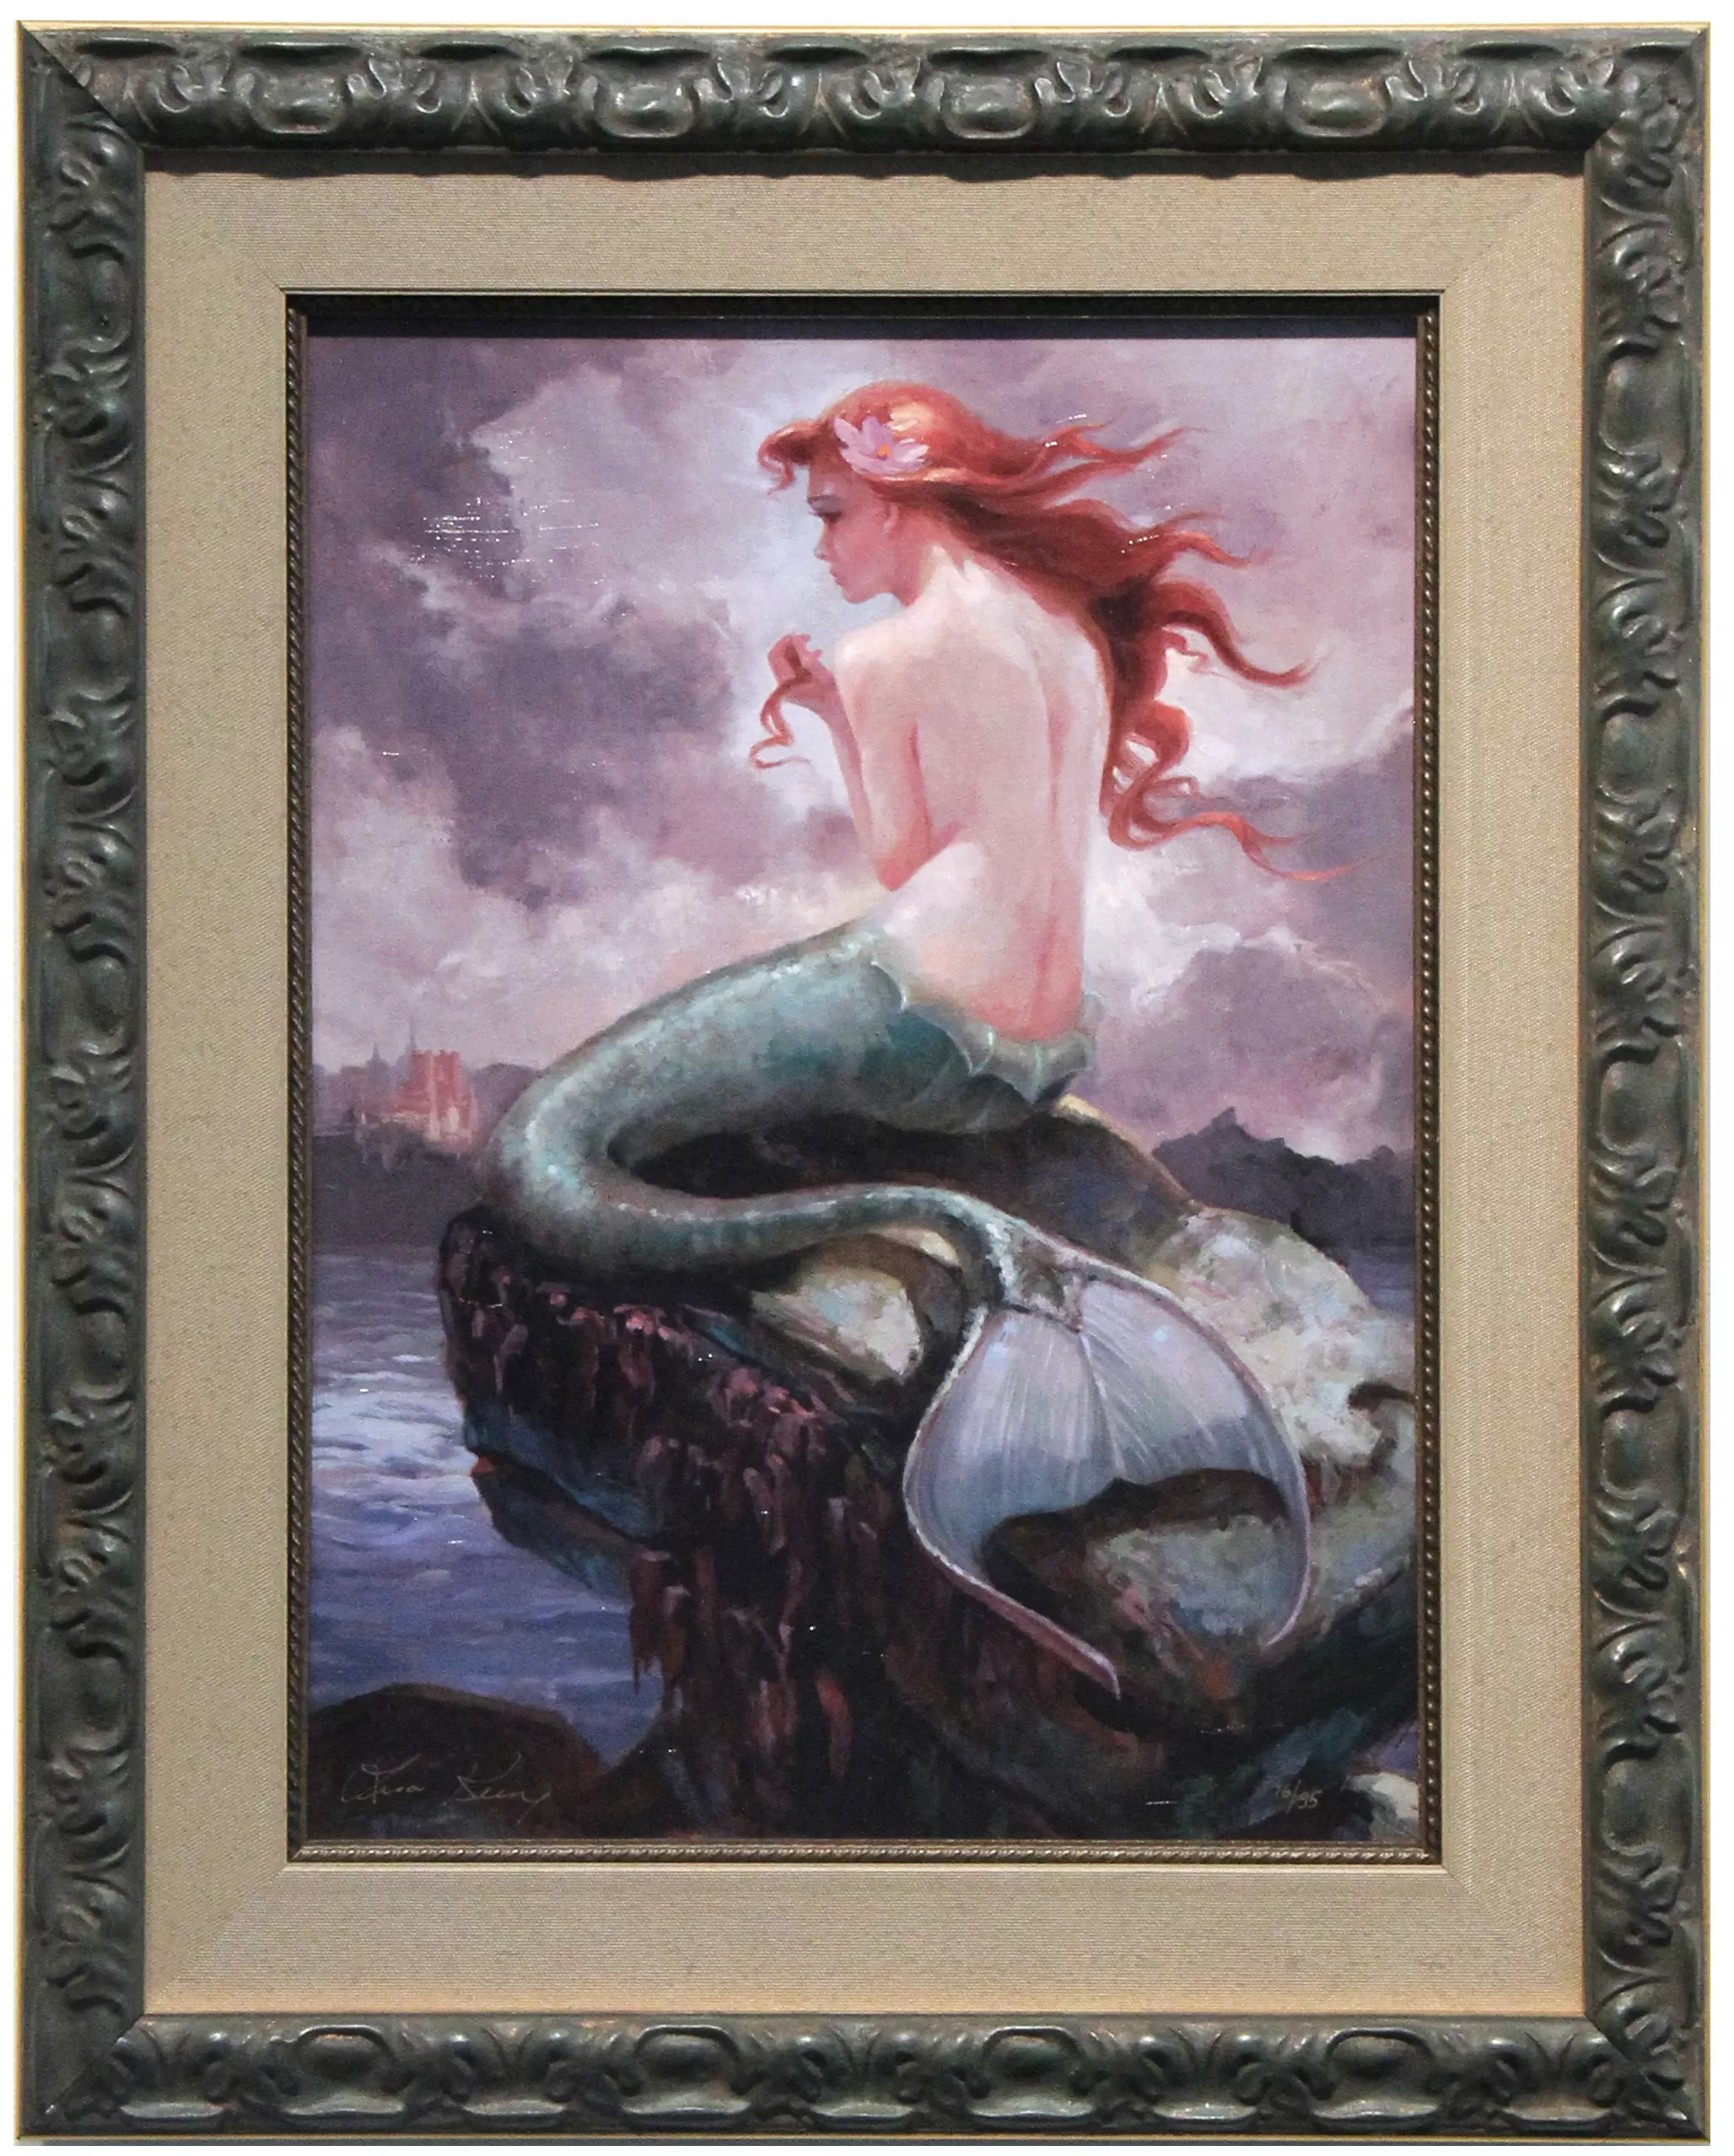 At Odds With the Sea - Lisa Keene (framed), The Little Mermaid